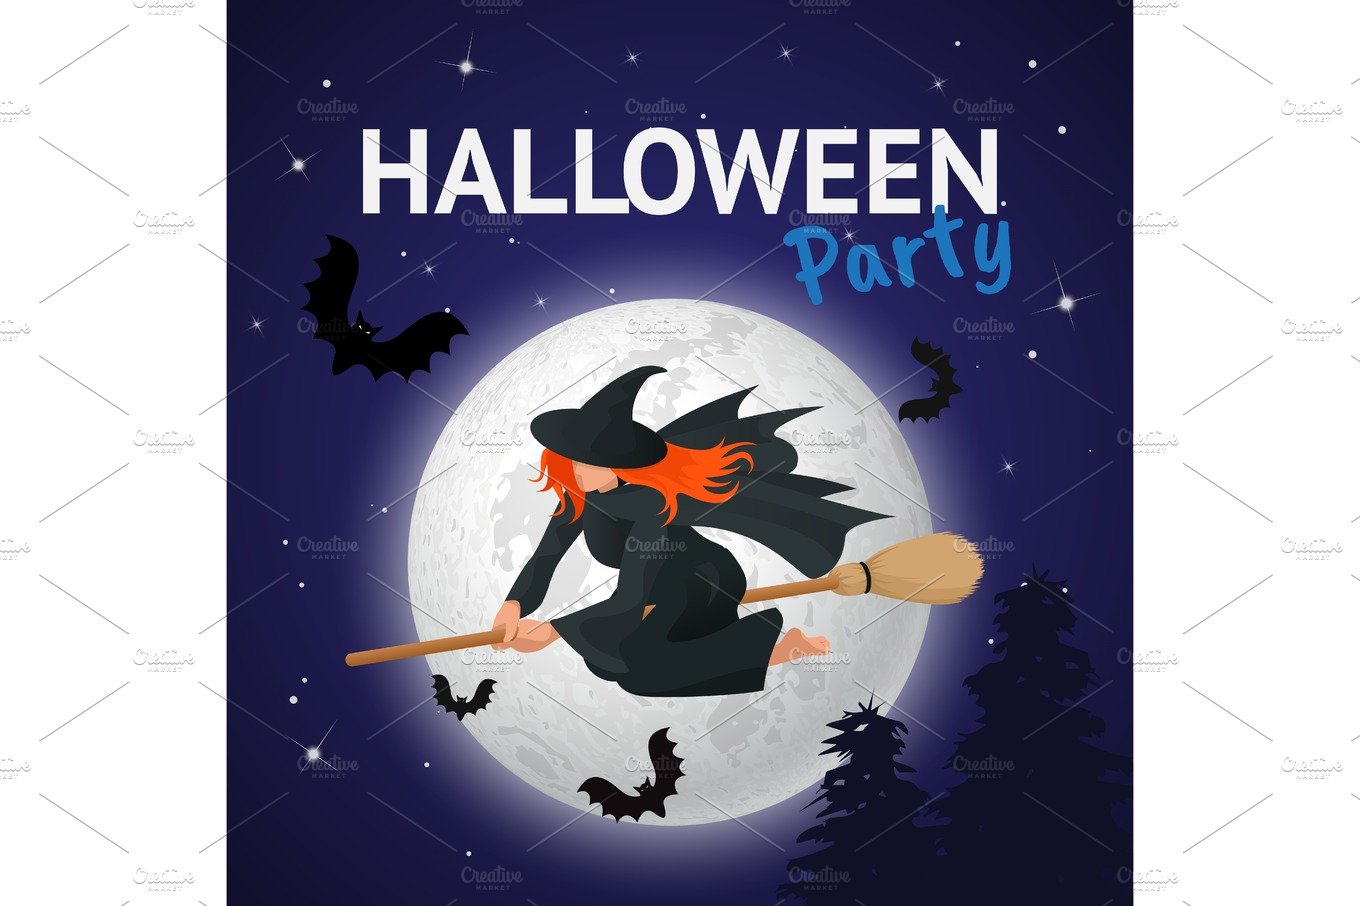 Witch flying on a broomstick across full moon at twilight for Halloween cover image.